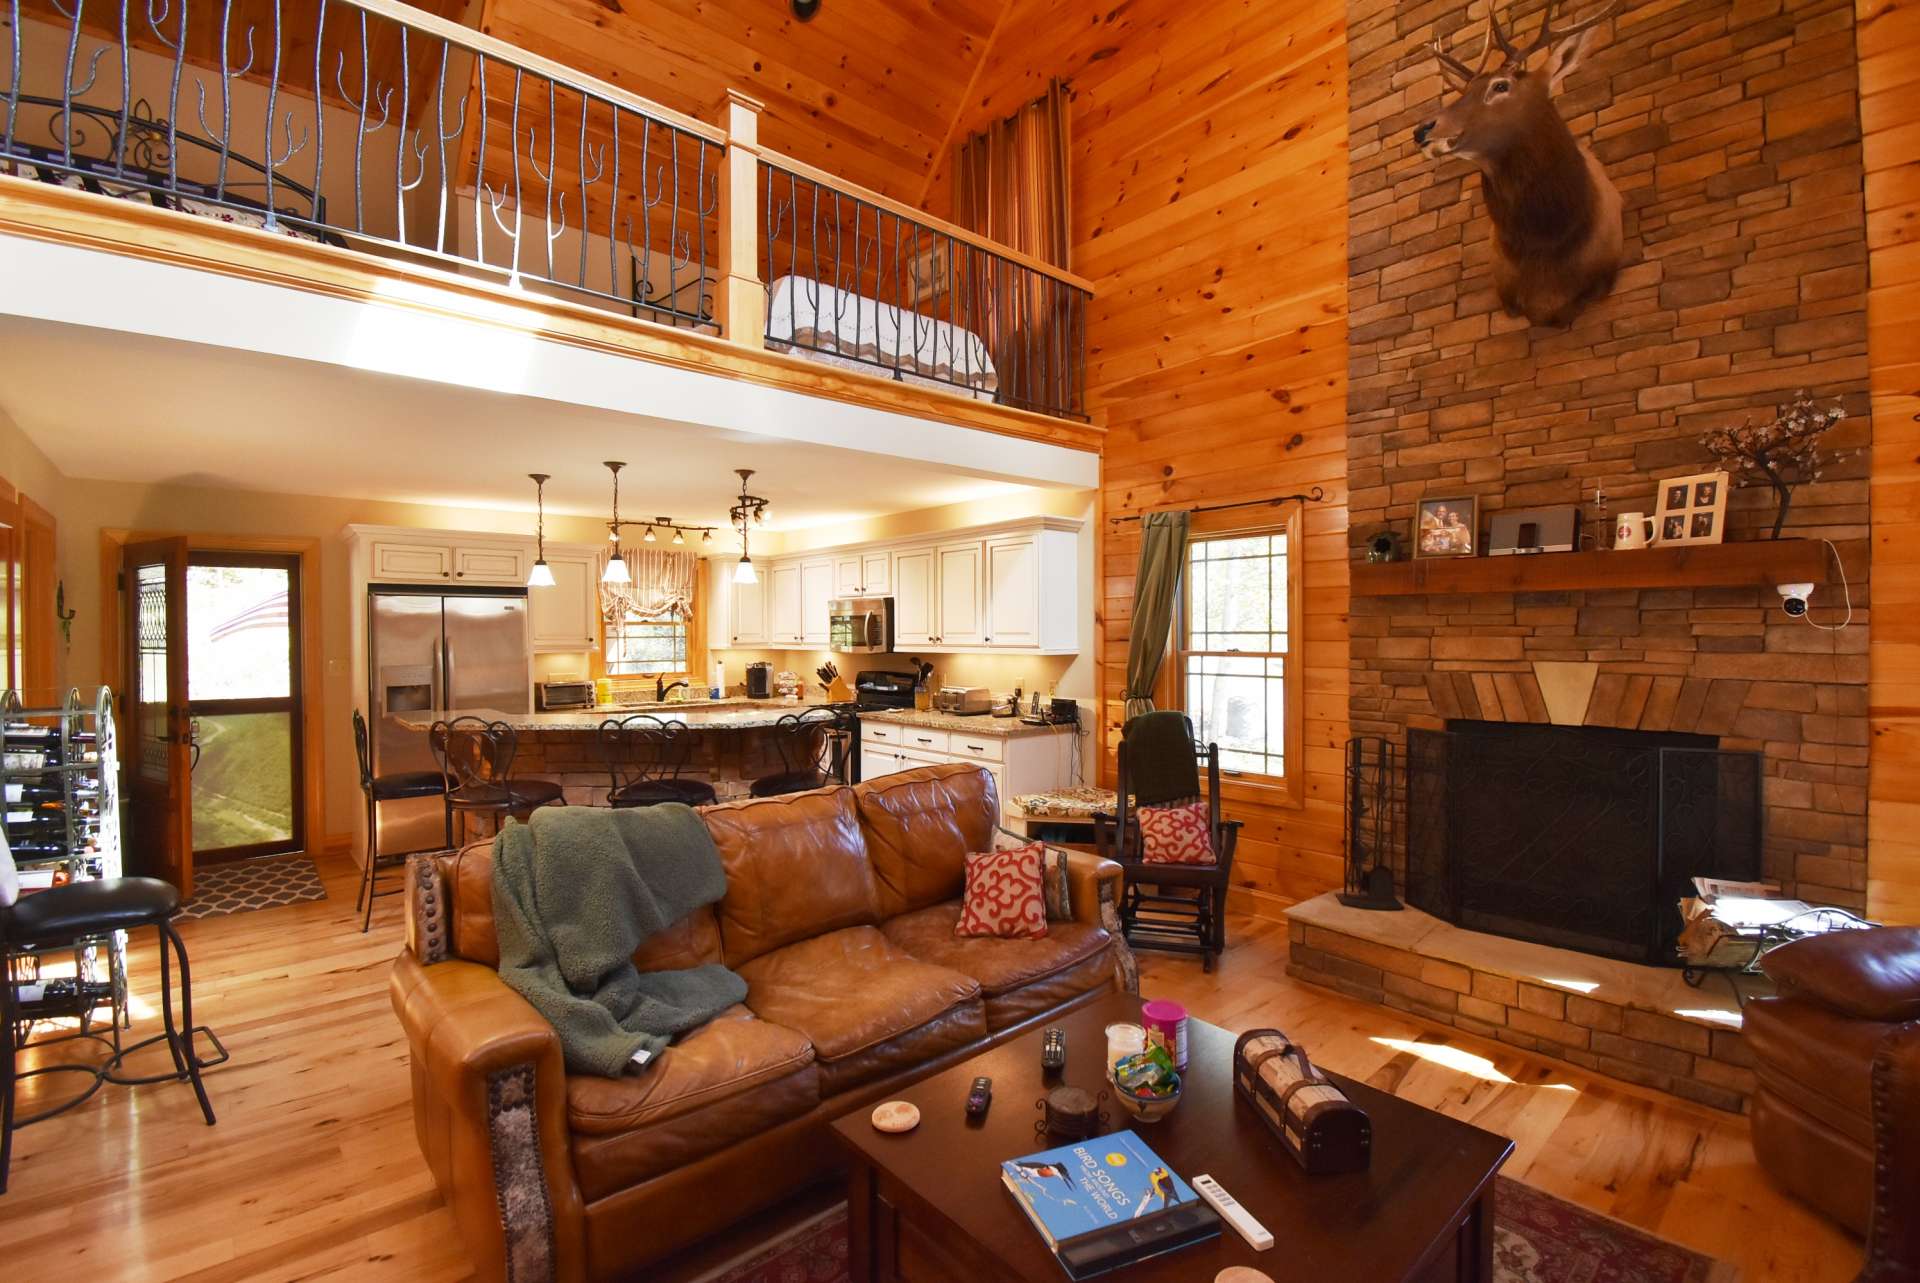 The fireplace is a central feature of the living room.  The open floor plan allows the host or hostess to stay involved in conversation while preparing the meal.